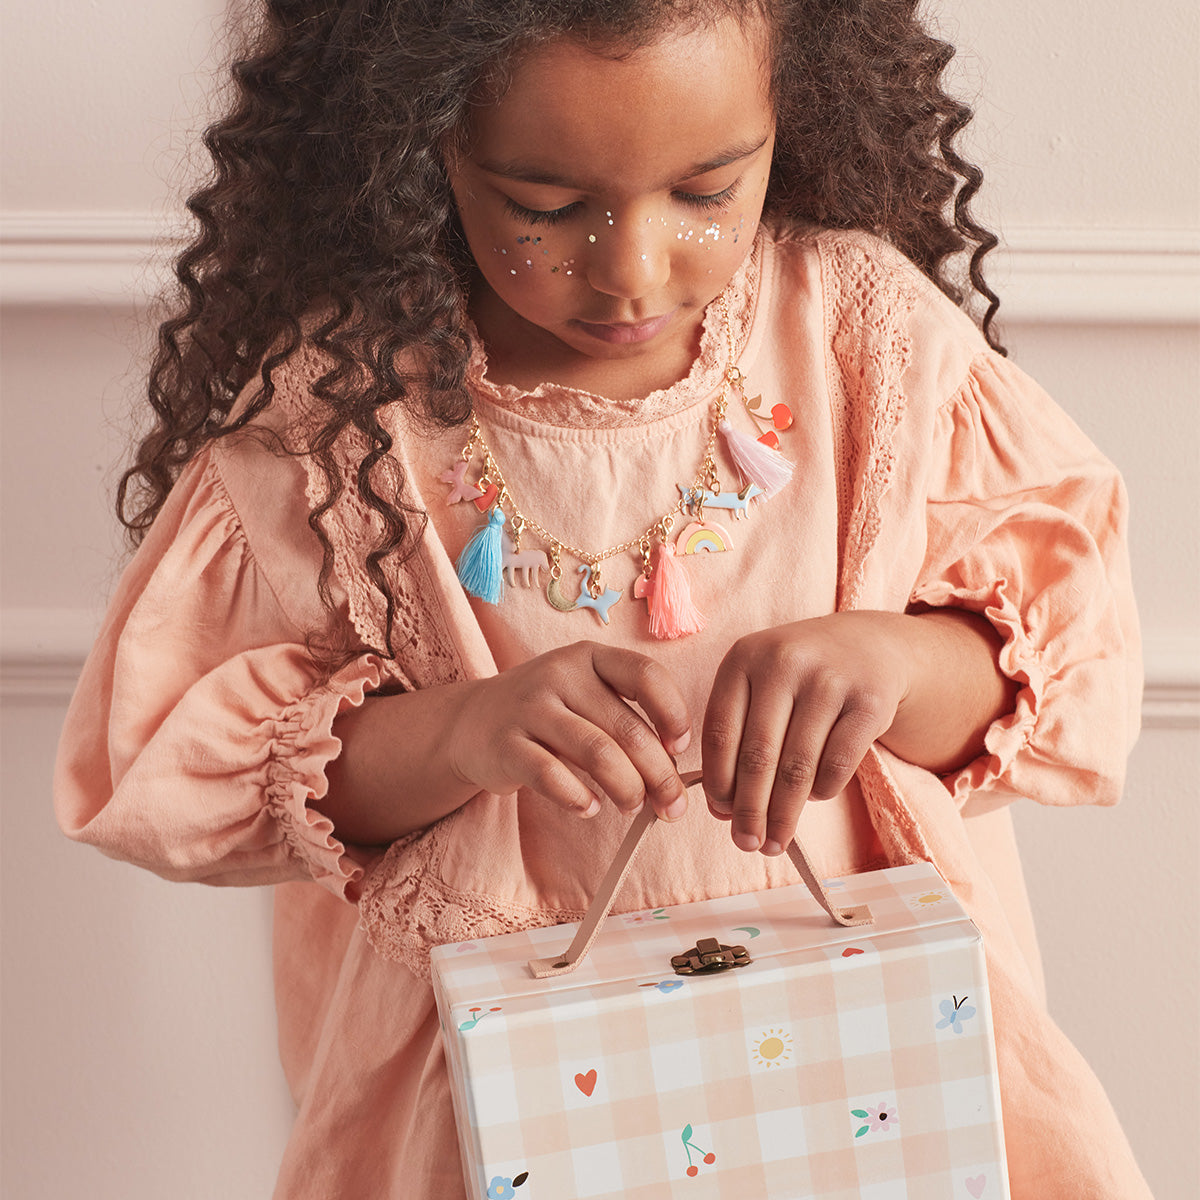 The pink gingham mini suitcase opens to reveal numbered trays filled with enamel charms, tassels and a gold tone necklace.